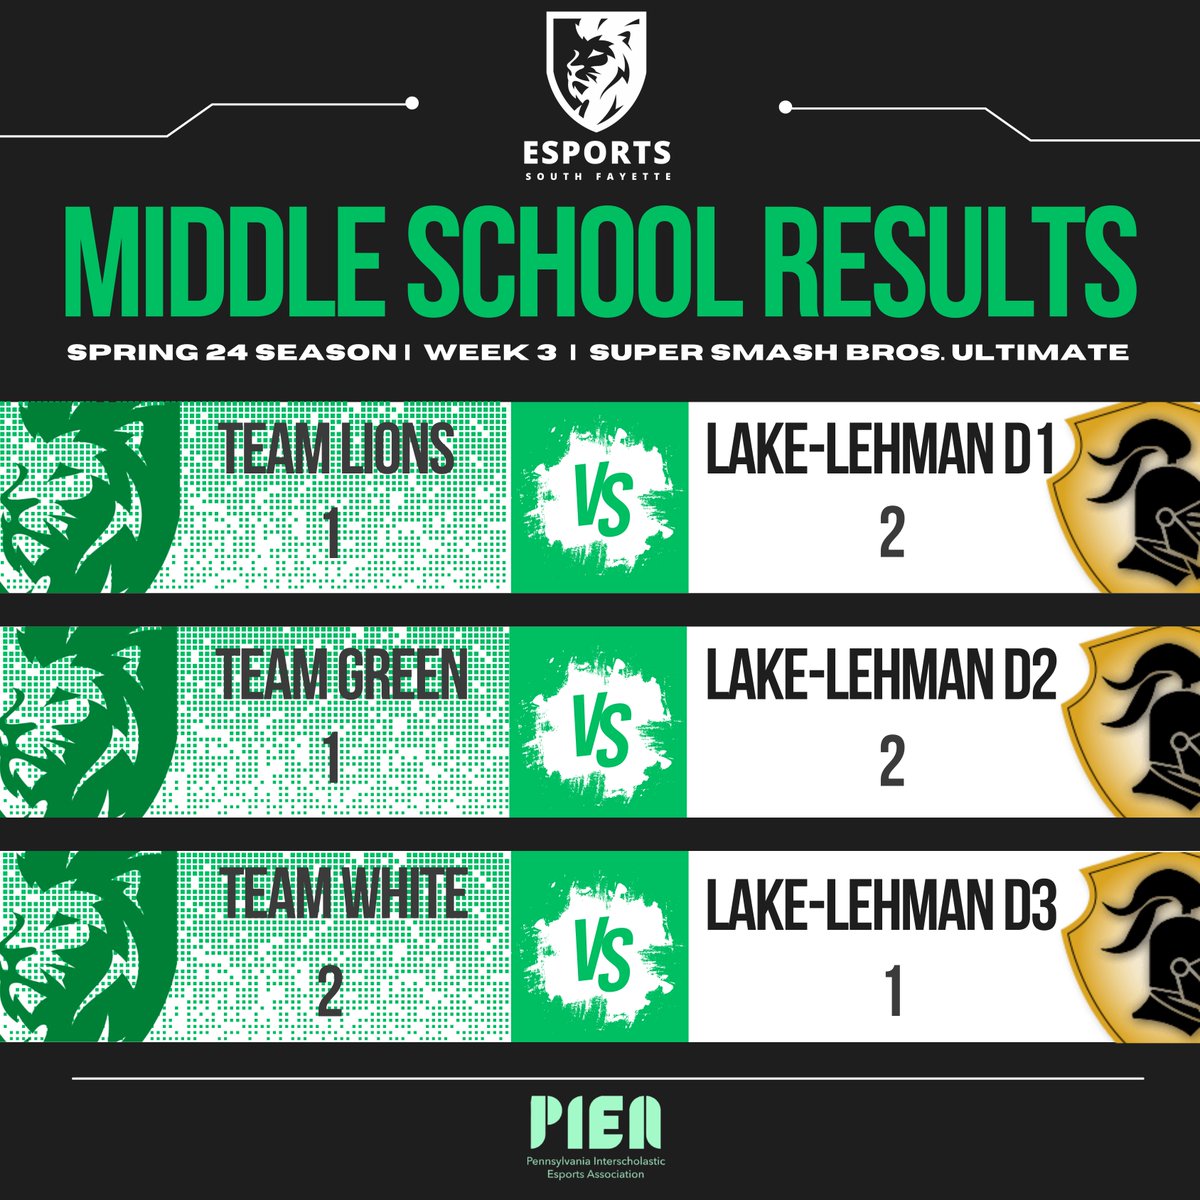 Lots of Middle School Esports action this week as our three teams went head-to-head with @LLSDKnights! Proud of the student leadership on display this afternoon. #SFLionPride #SFMSLionPride @PIEA_esports